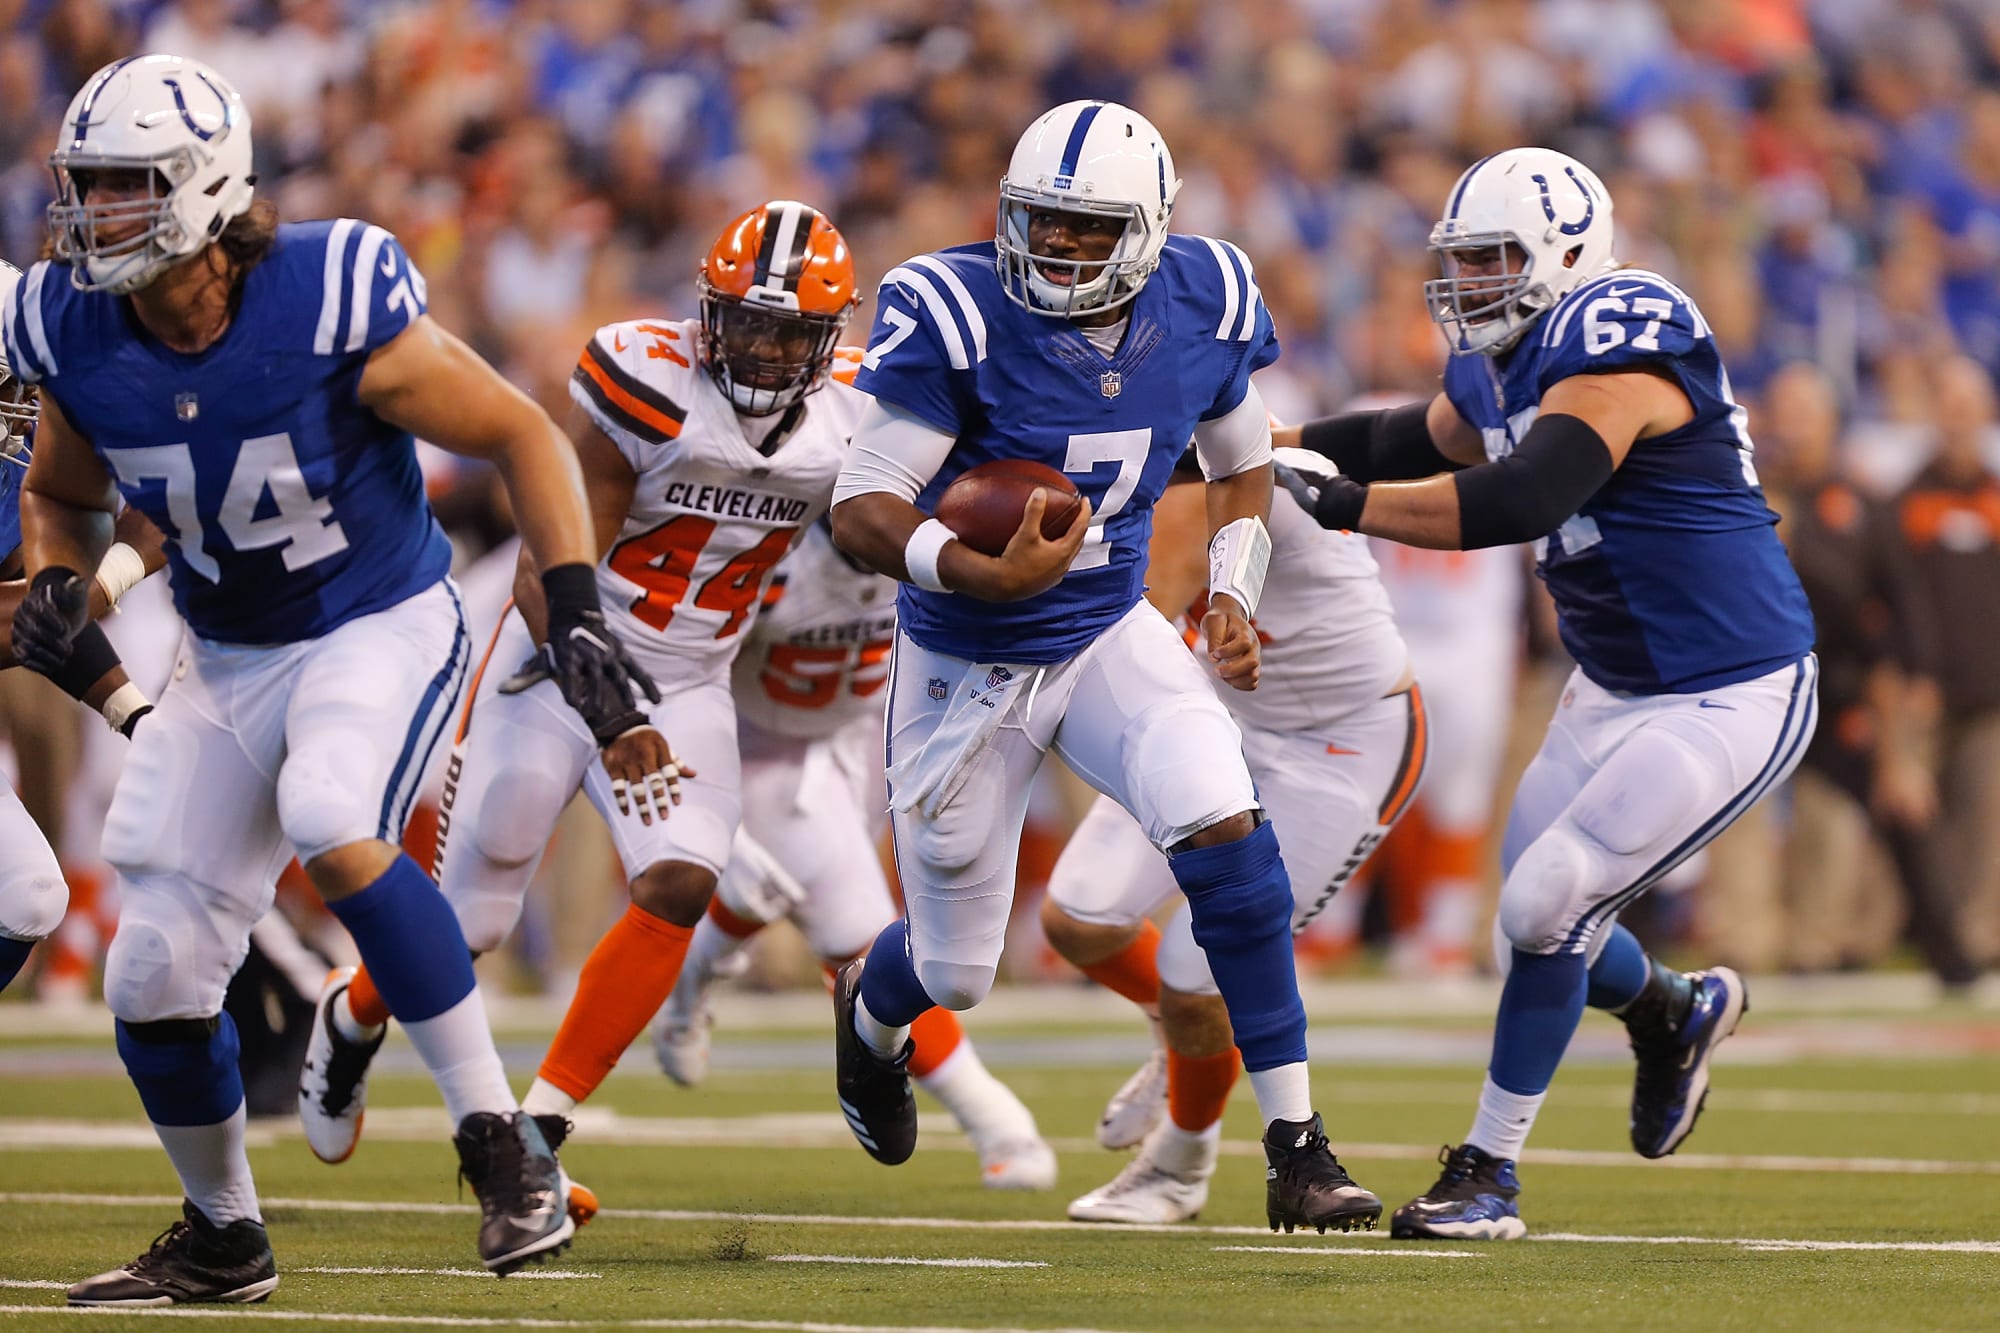 Browns vs. Colts Highlights, game tracker and more